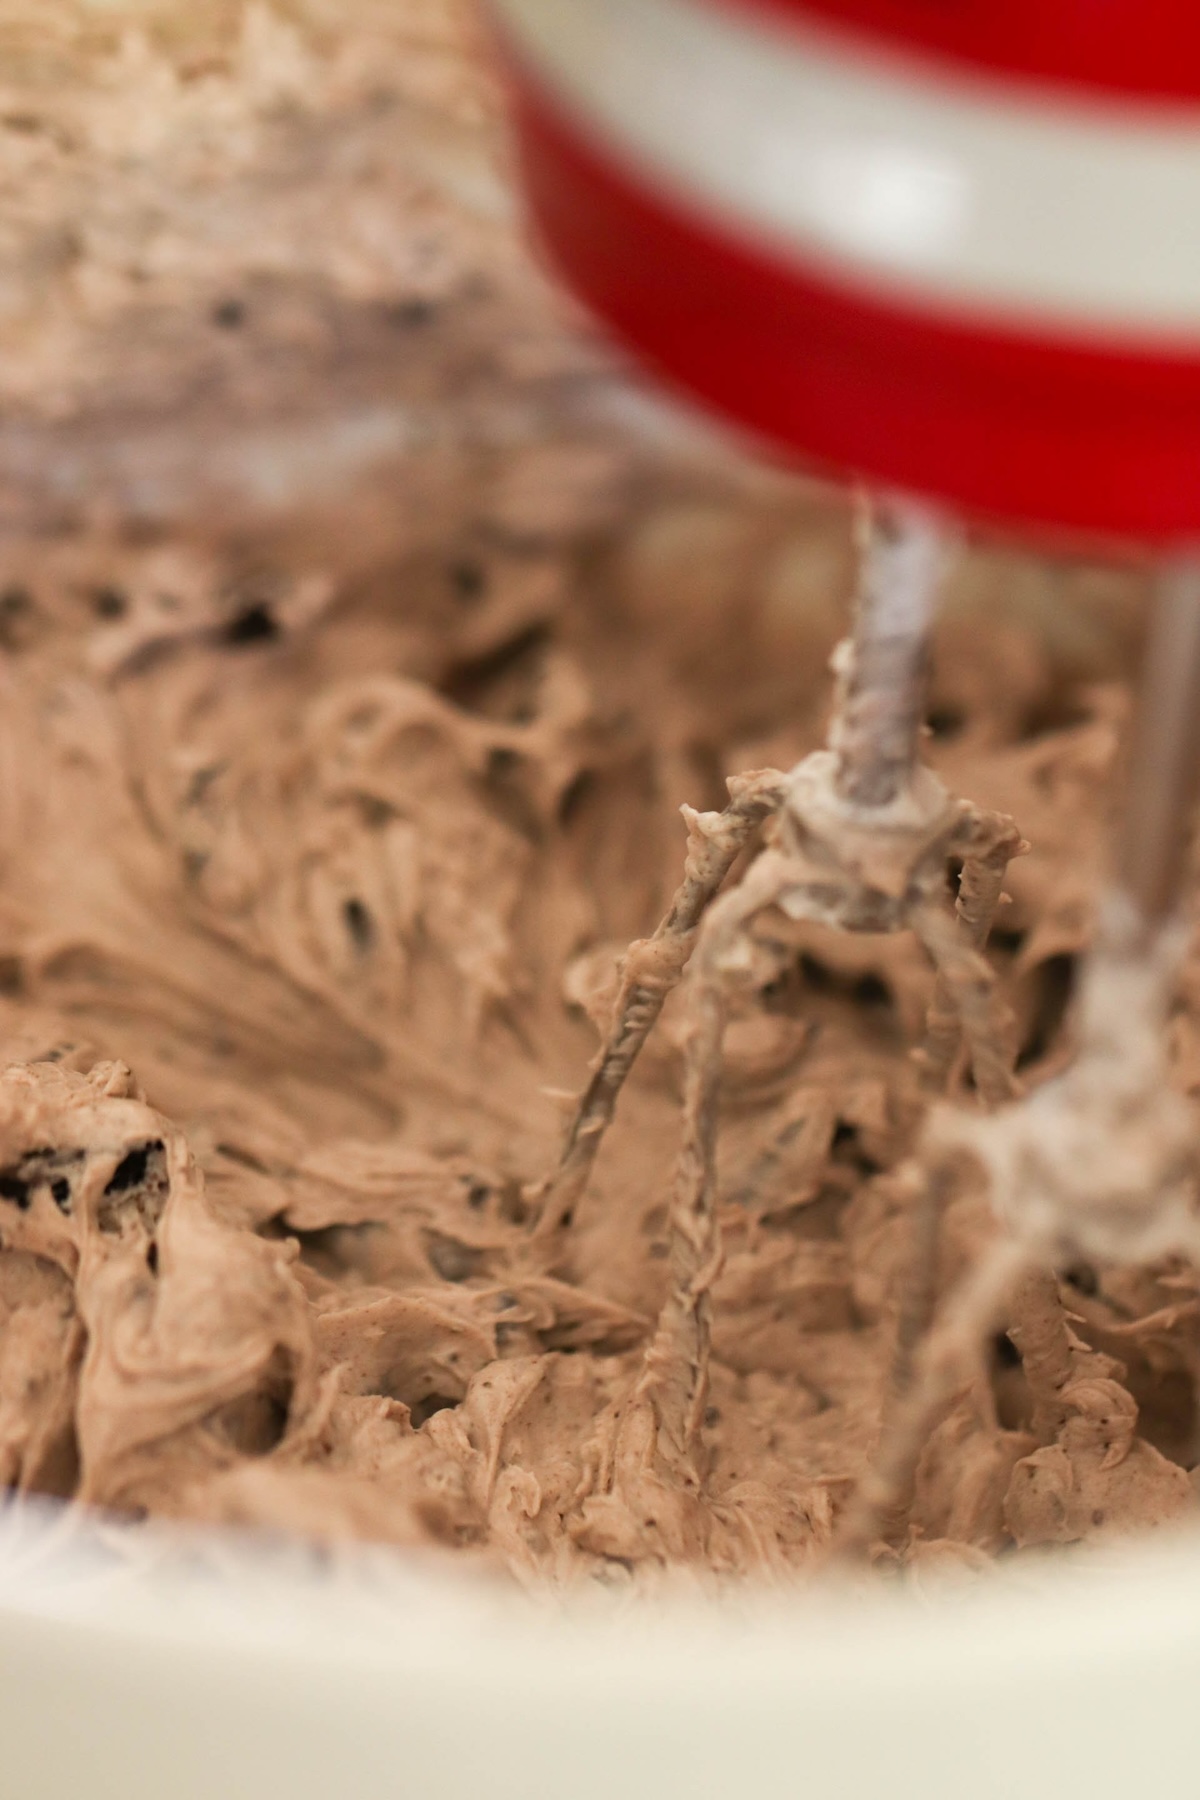 Close-up of an electric mixer with beater attachments blending chocolate batter.